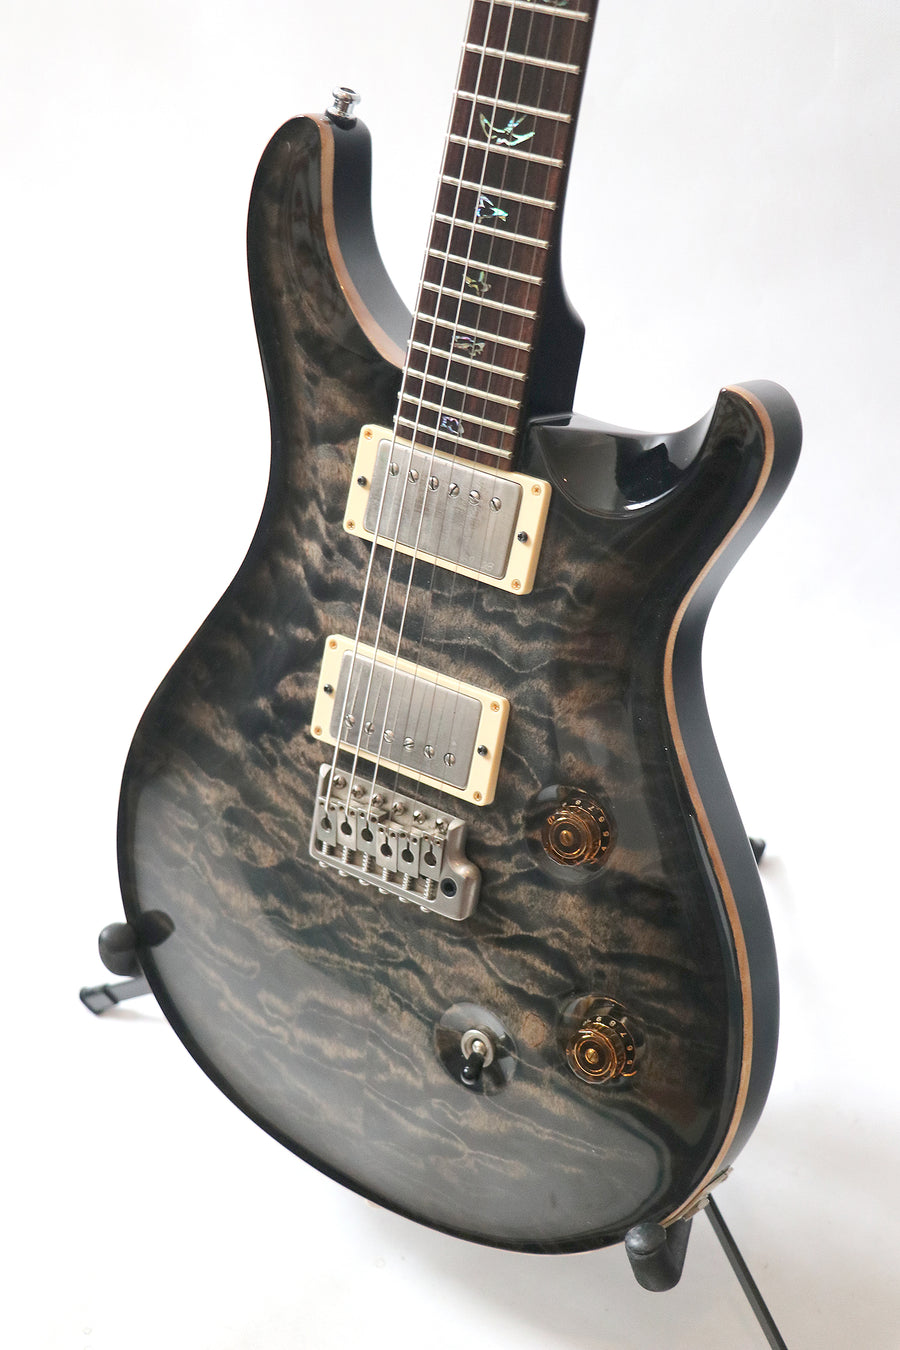 2008 PRS 1957/2008 Custom 24 10 Top Limited Edition #239